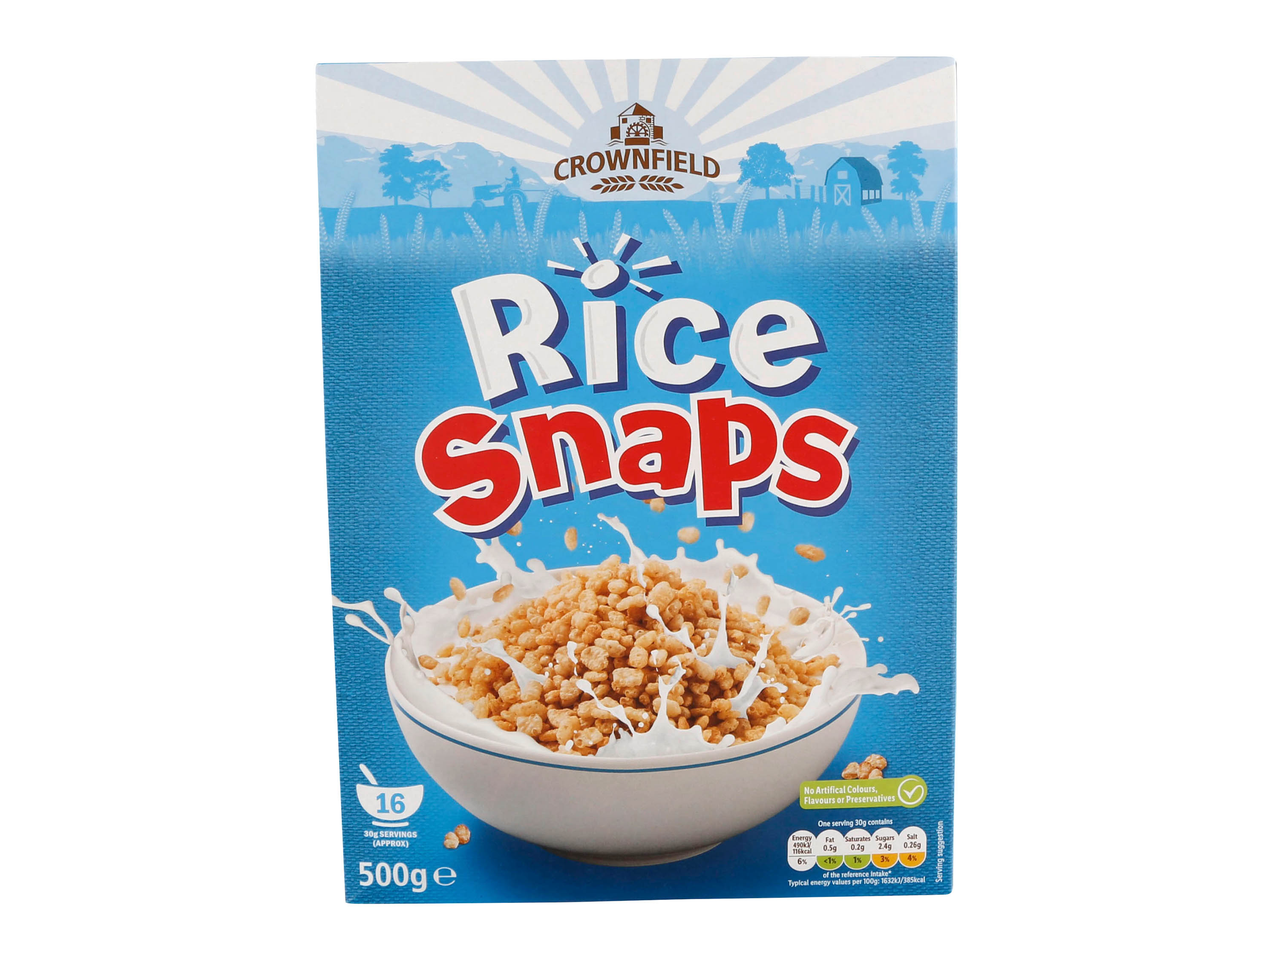 Go to full screen view: Rice Snaps - Image 1